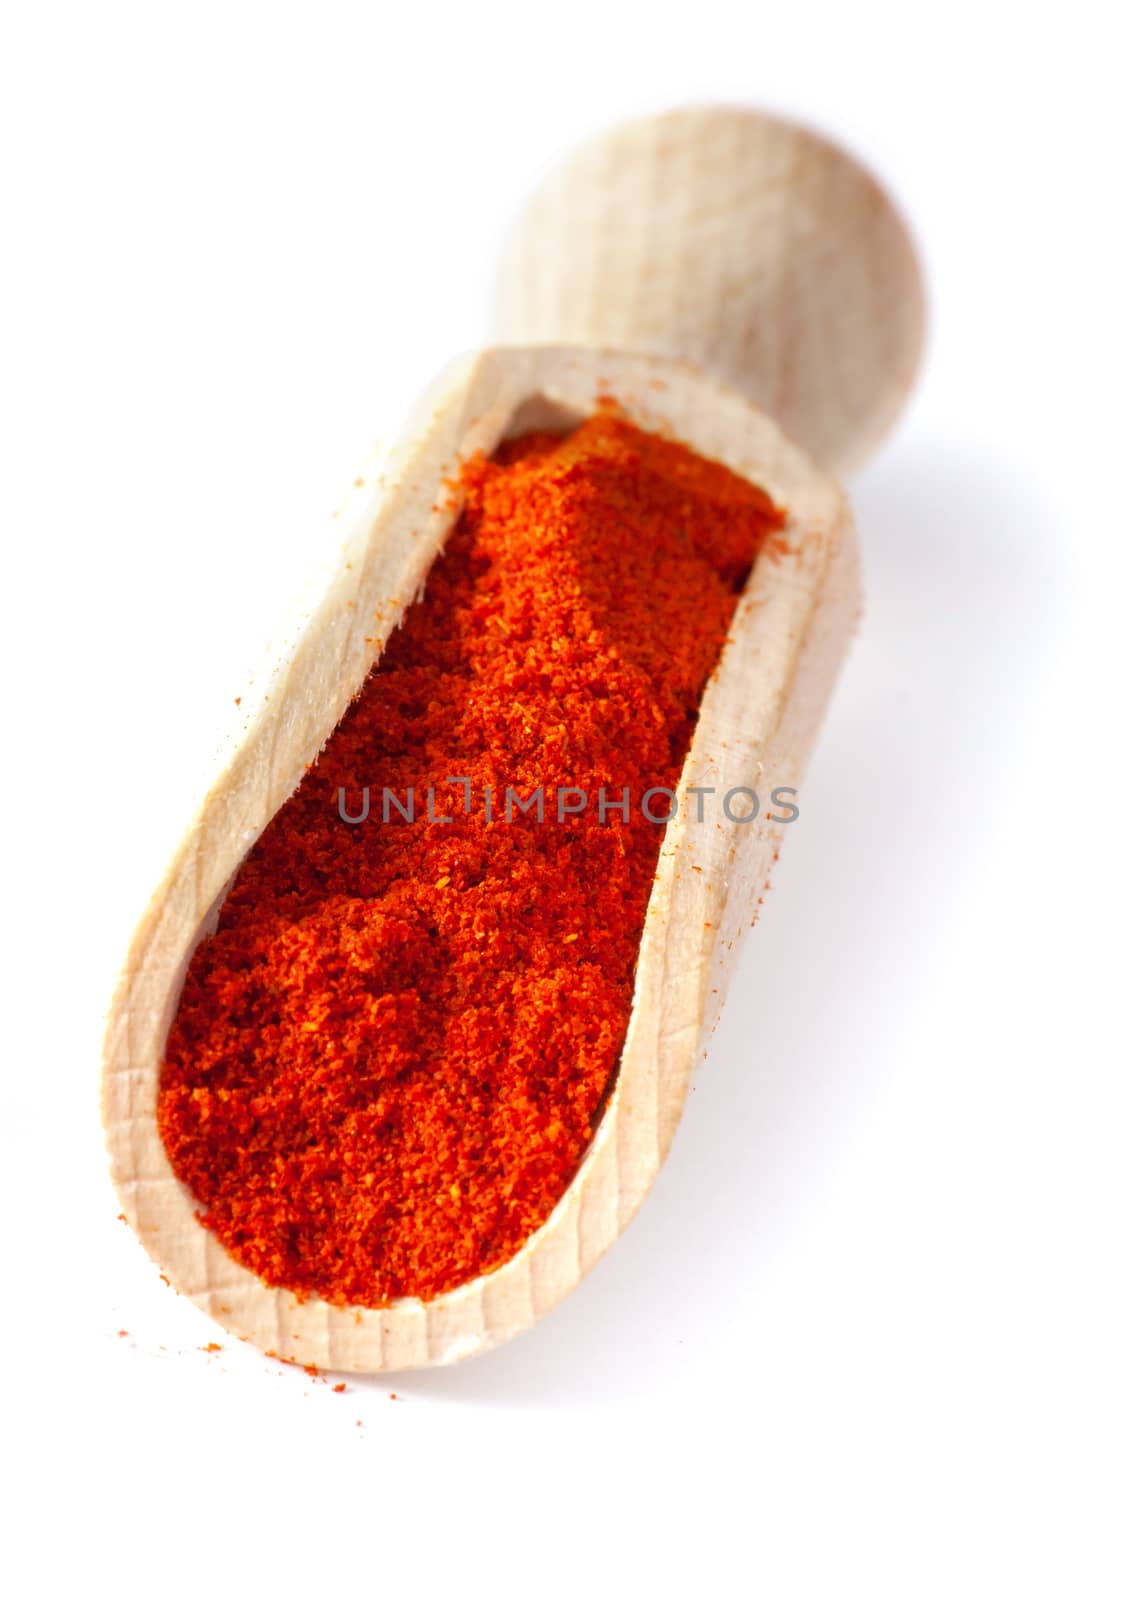 Red pepper ground. Spice powder on wooden spoon, isolated over White Background.